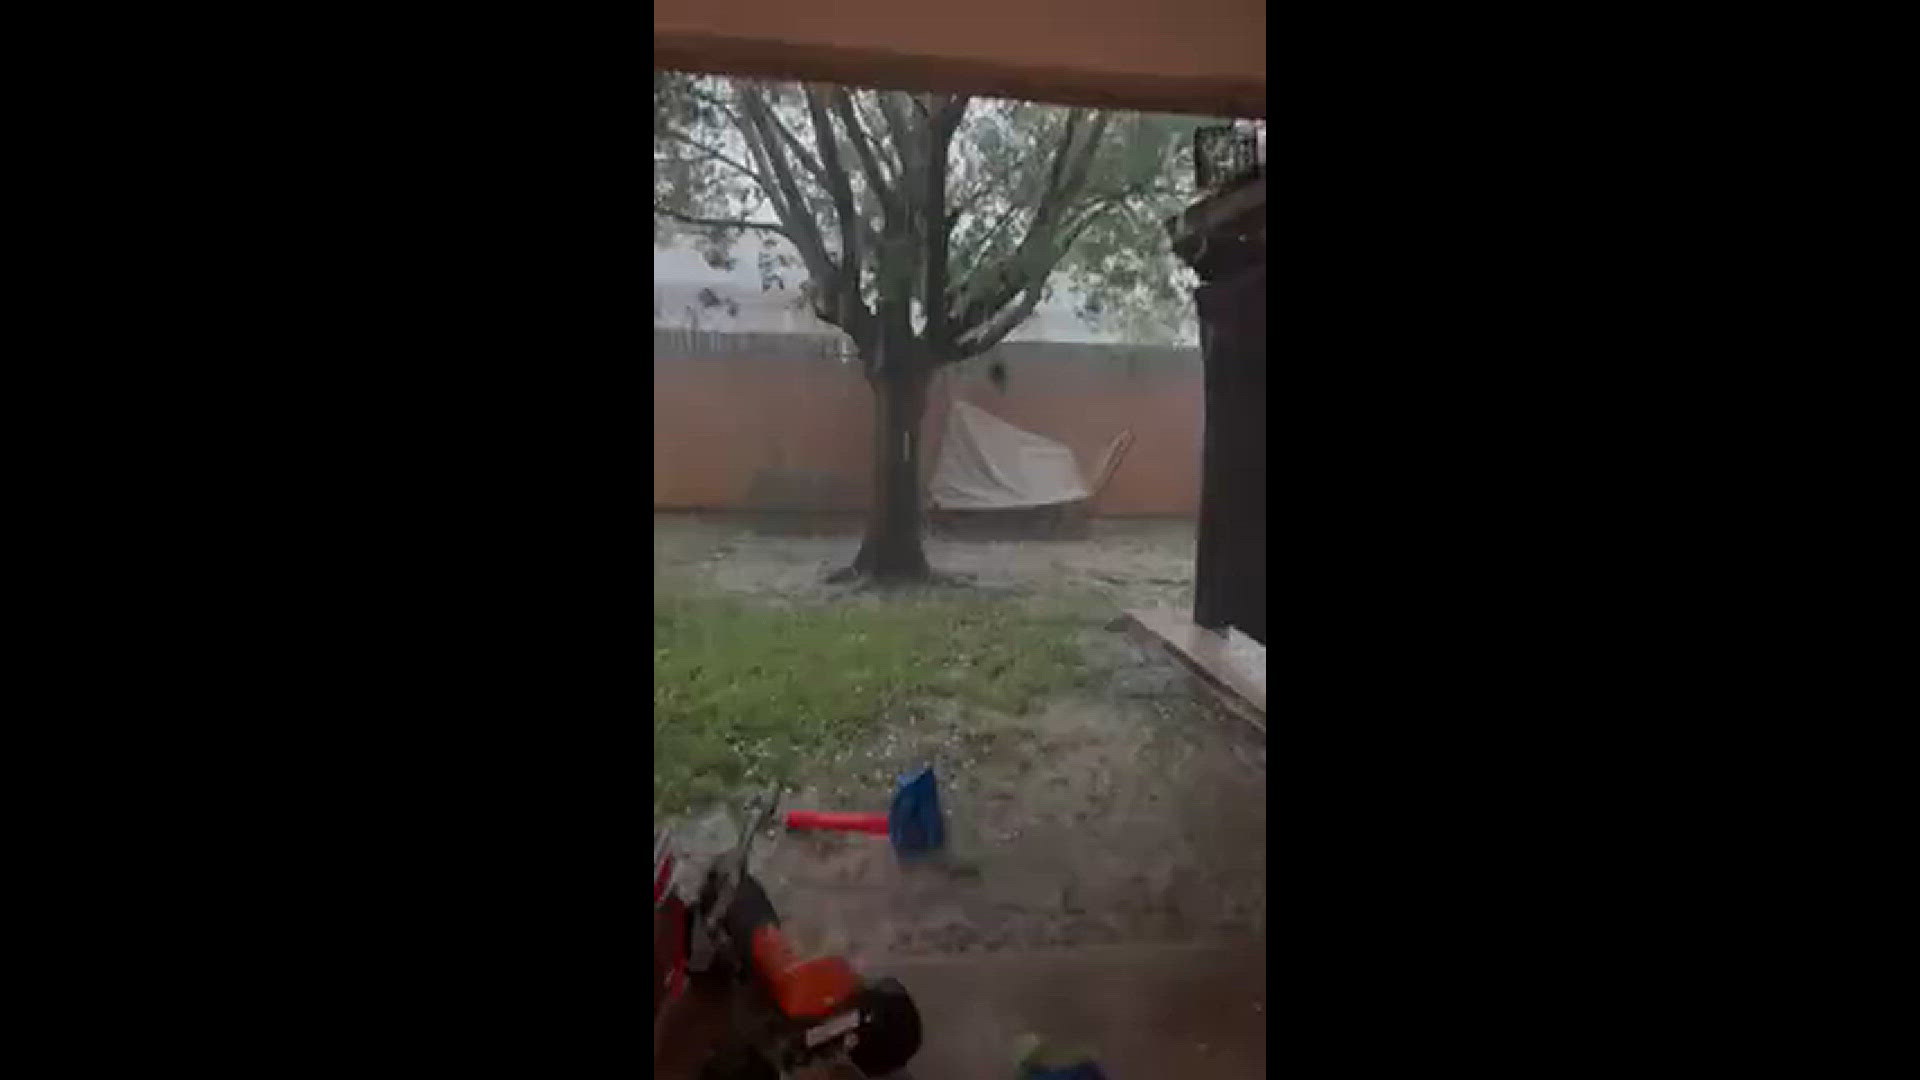 Hail and heavy rain falls in a Harker Heights backyard
Credit: Michelle Howell